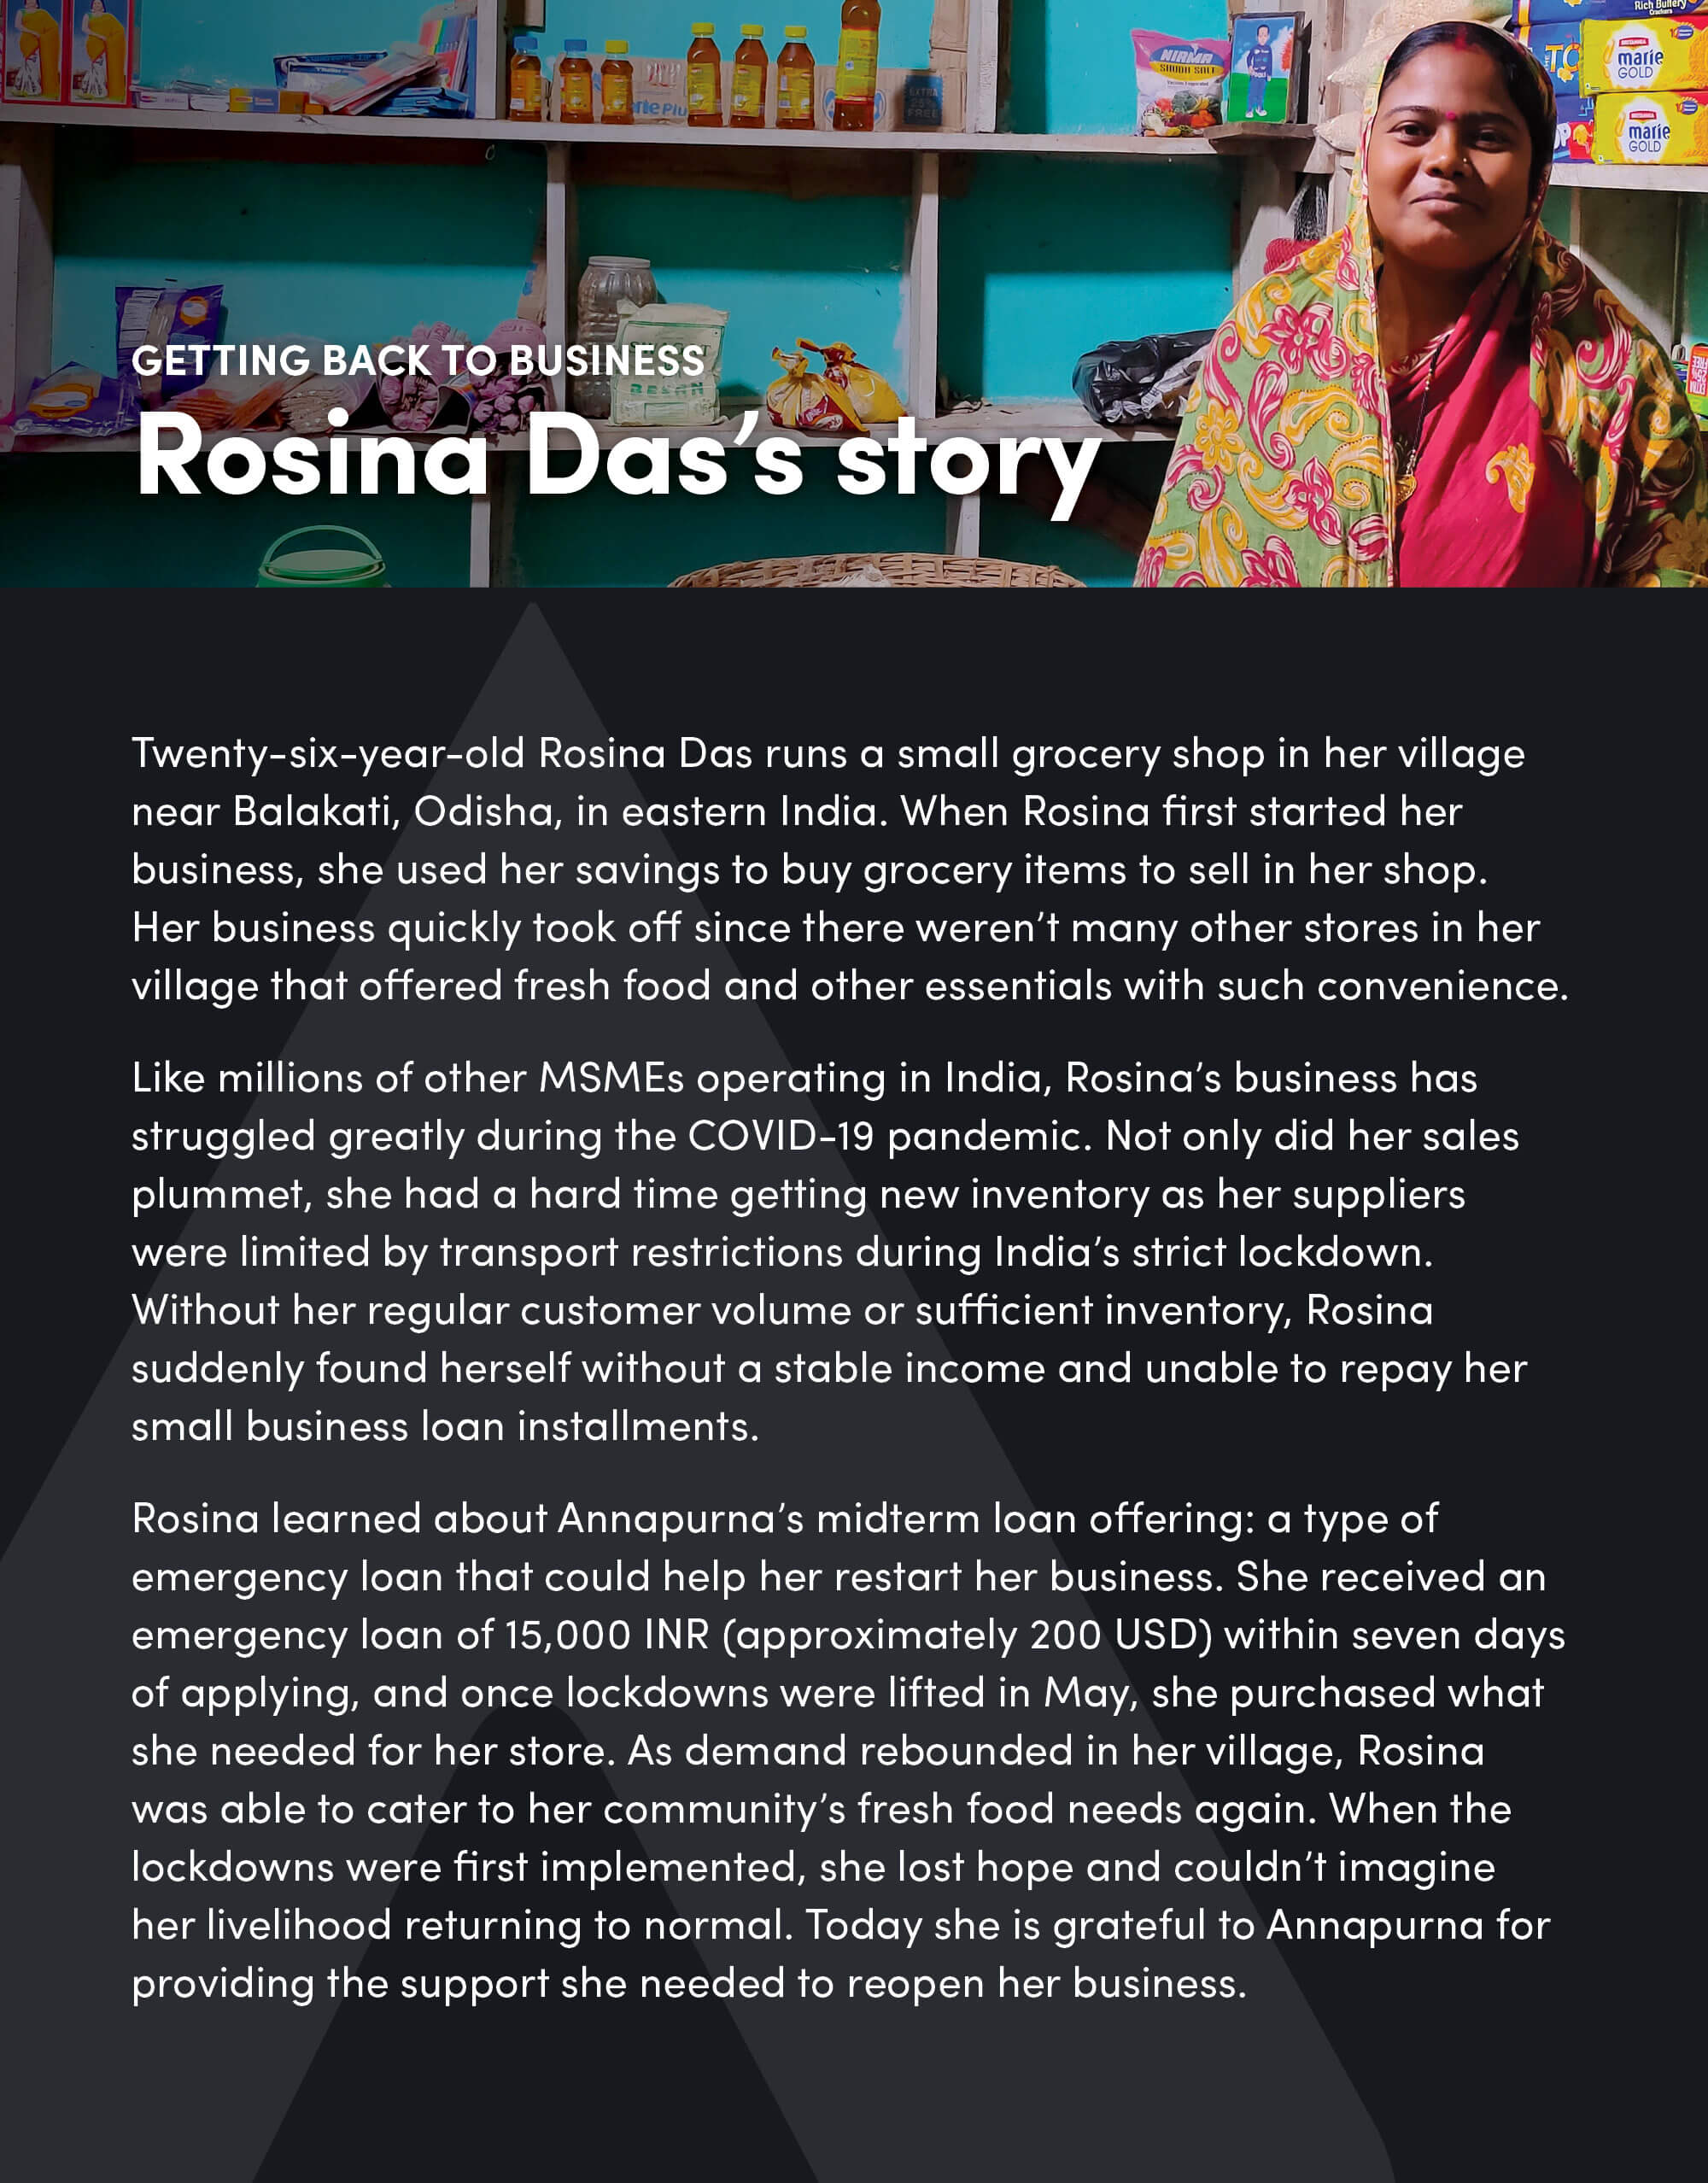 Getting back to business: Rosina Das's story